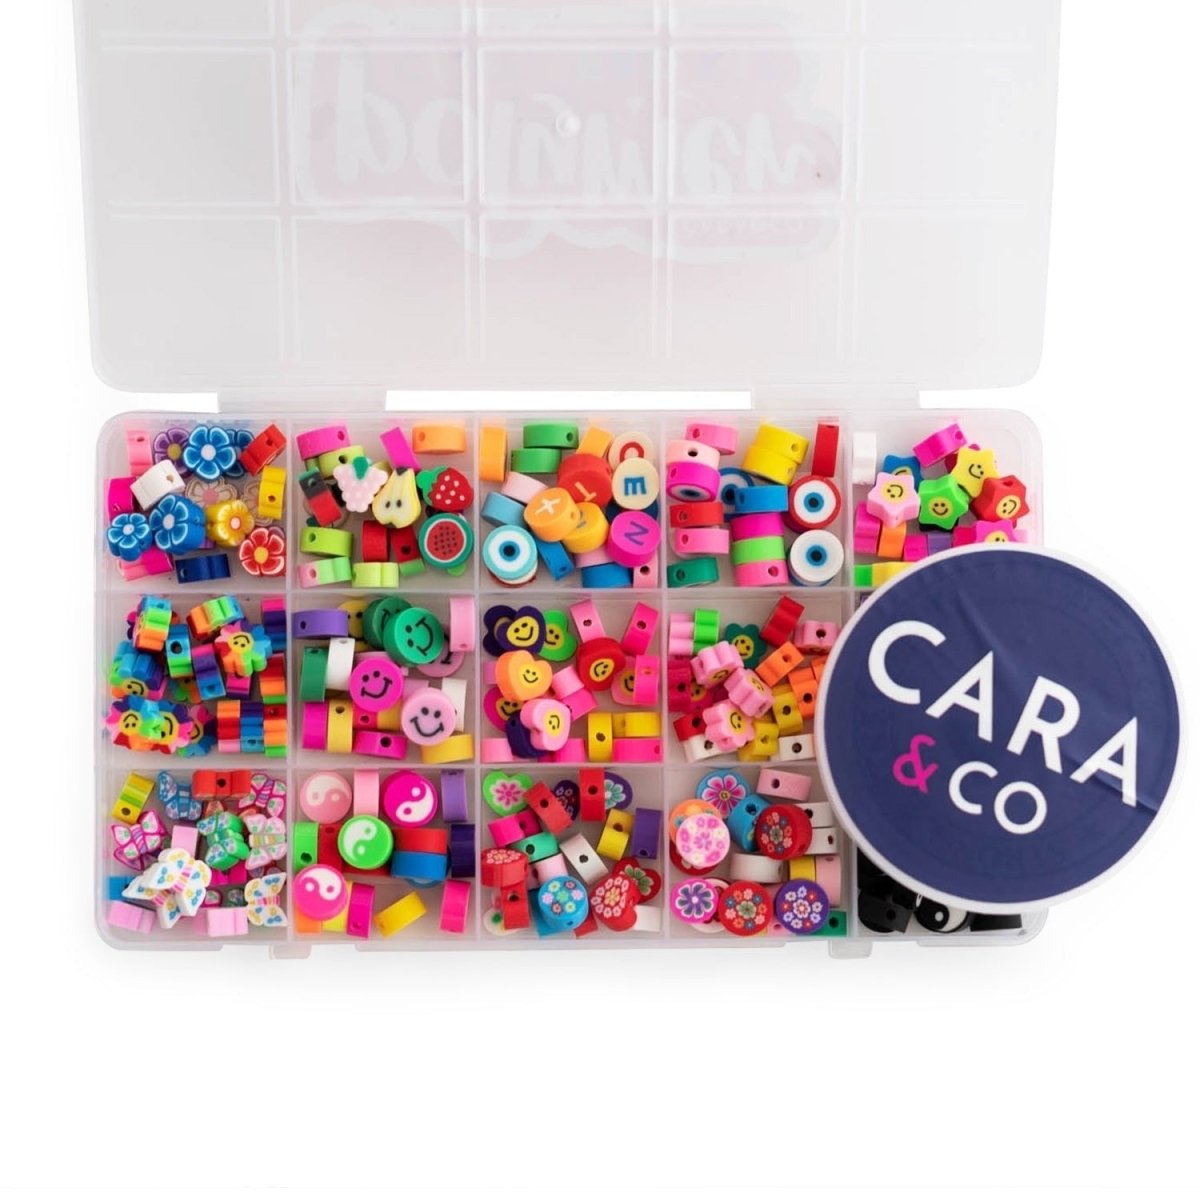 Heishi Craft Kits Polymer Clay - Shapes from Cara & Co Craft Supply